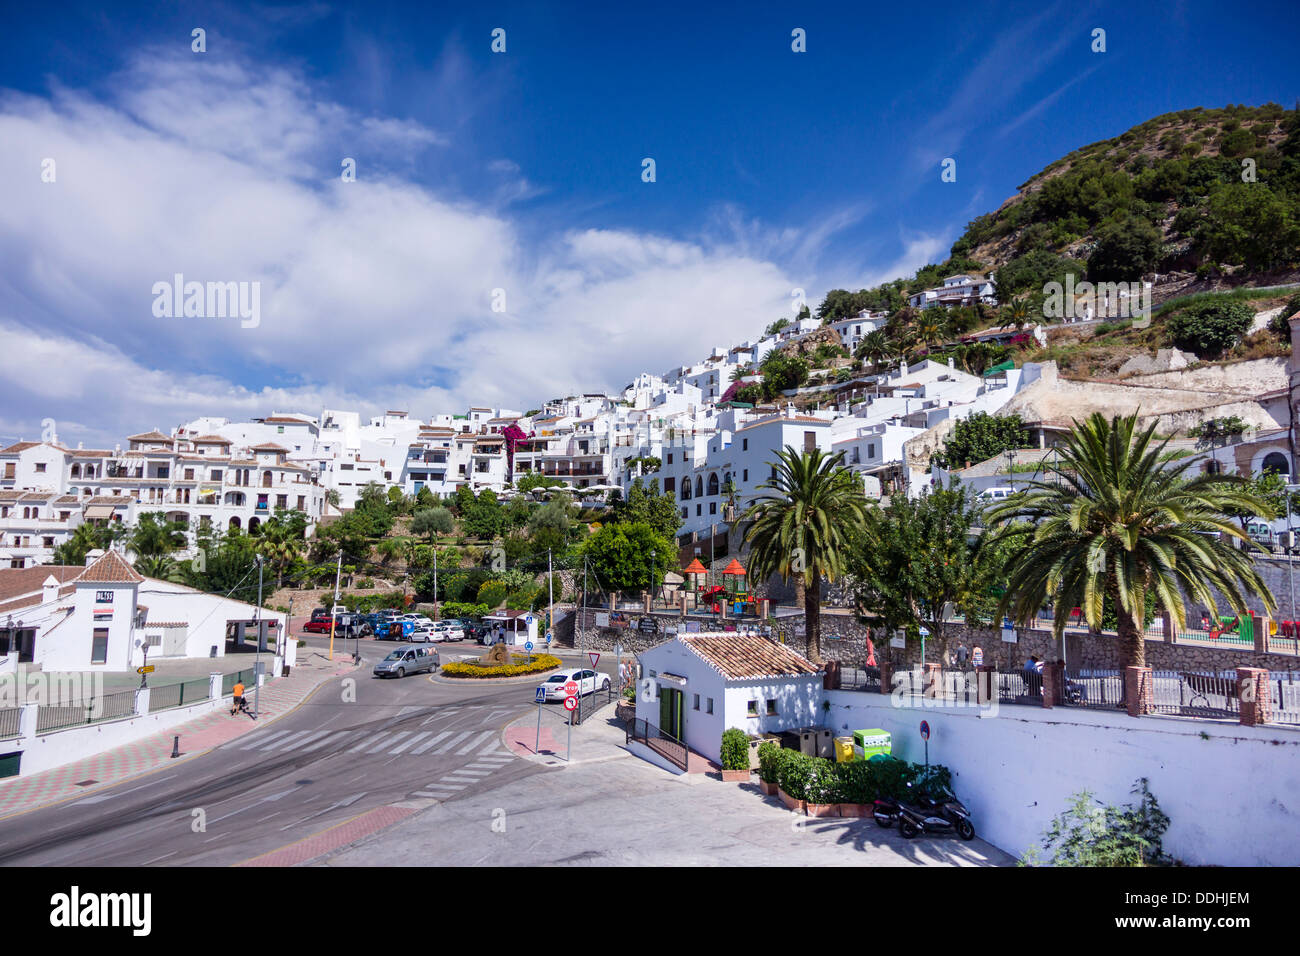 The whitewashed Andalusian mountain village of Frigiliana in southern Spain. Stock Photo